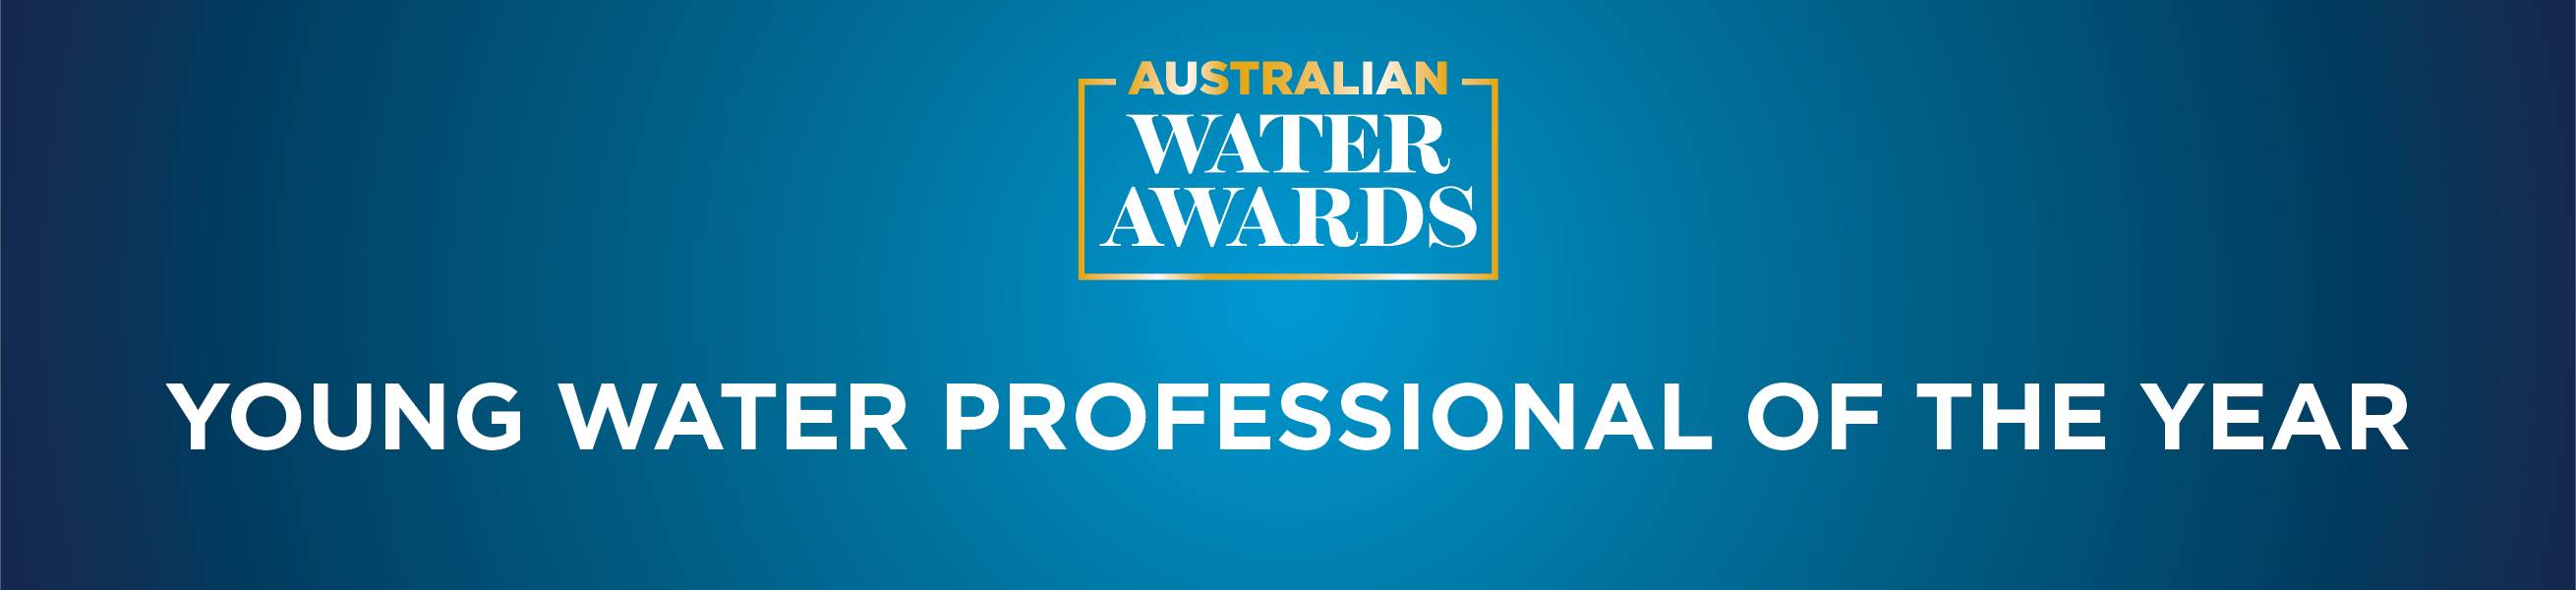 Young Water Professional of the Year